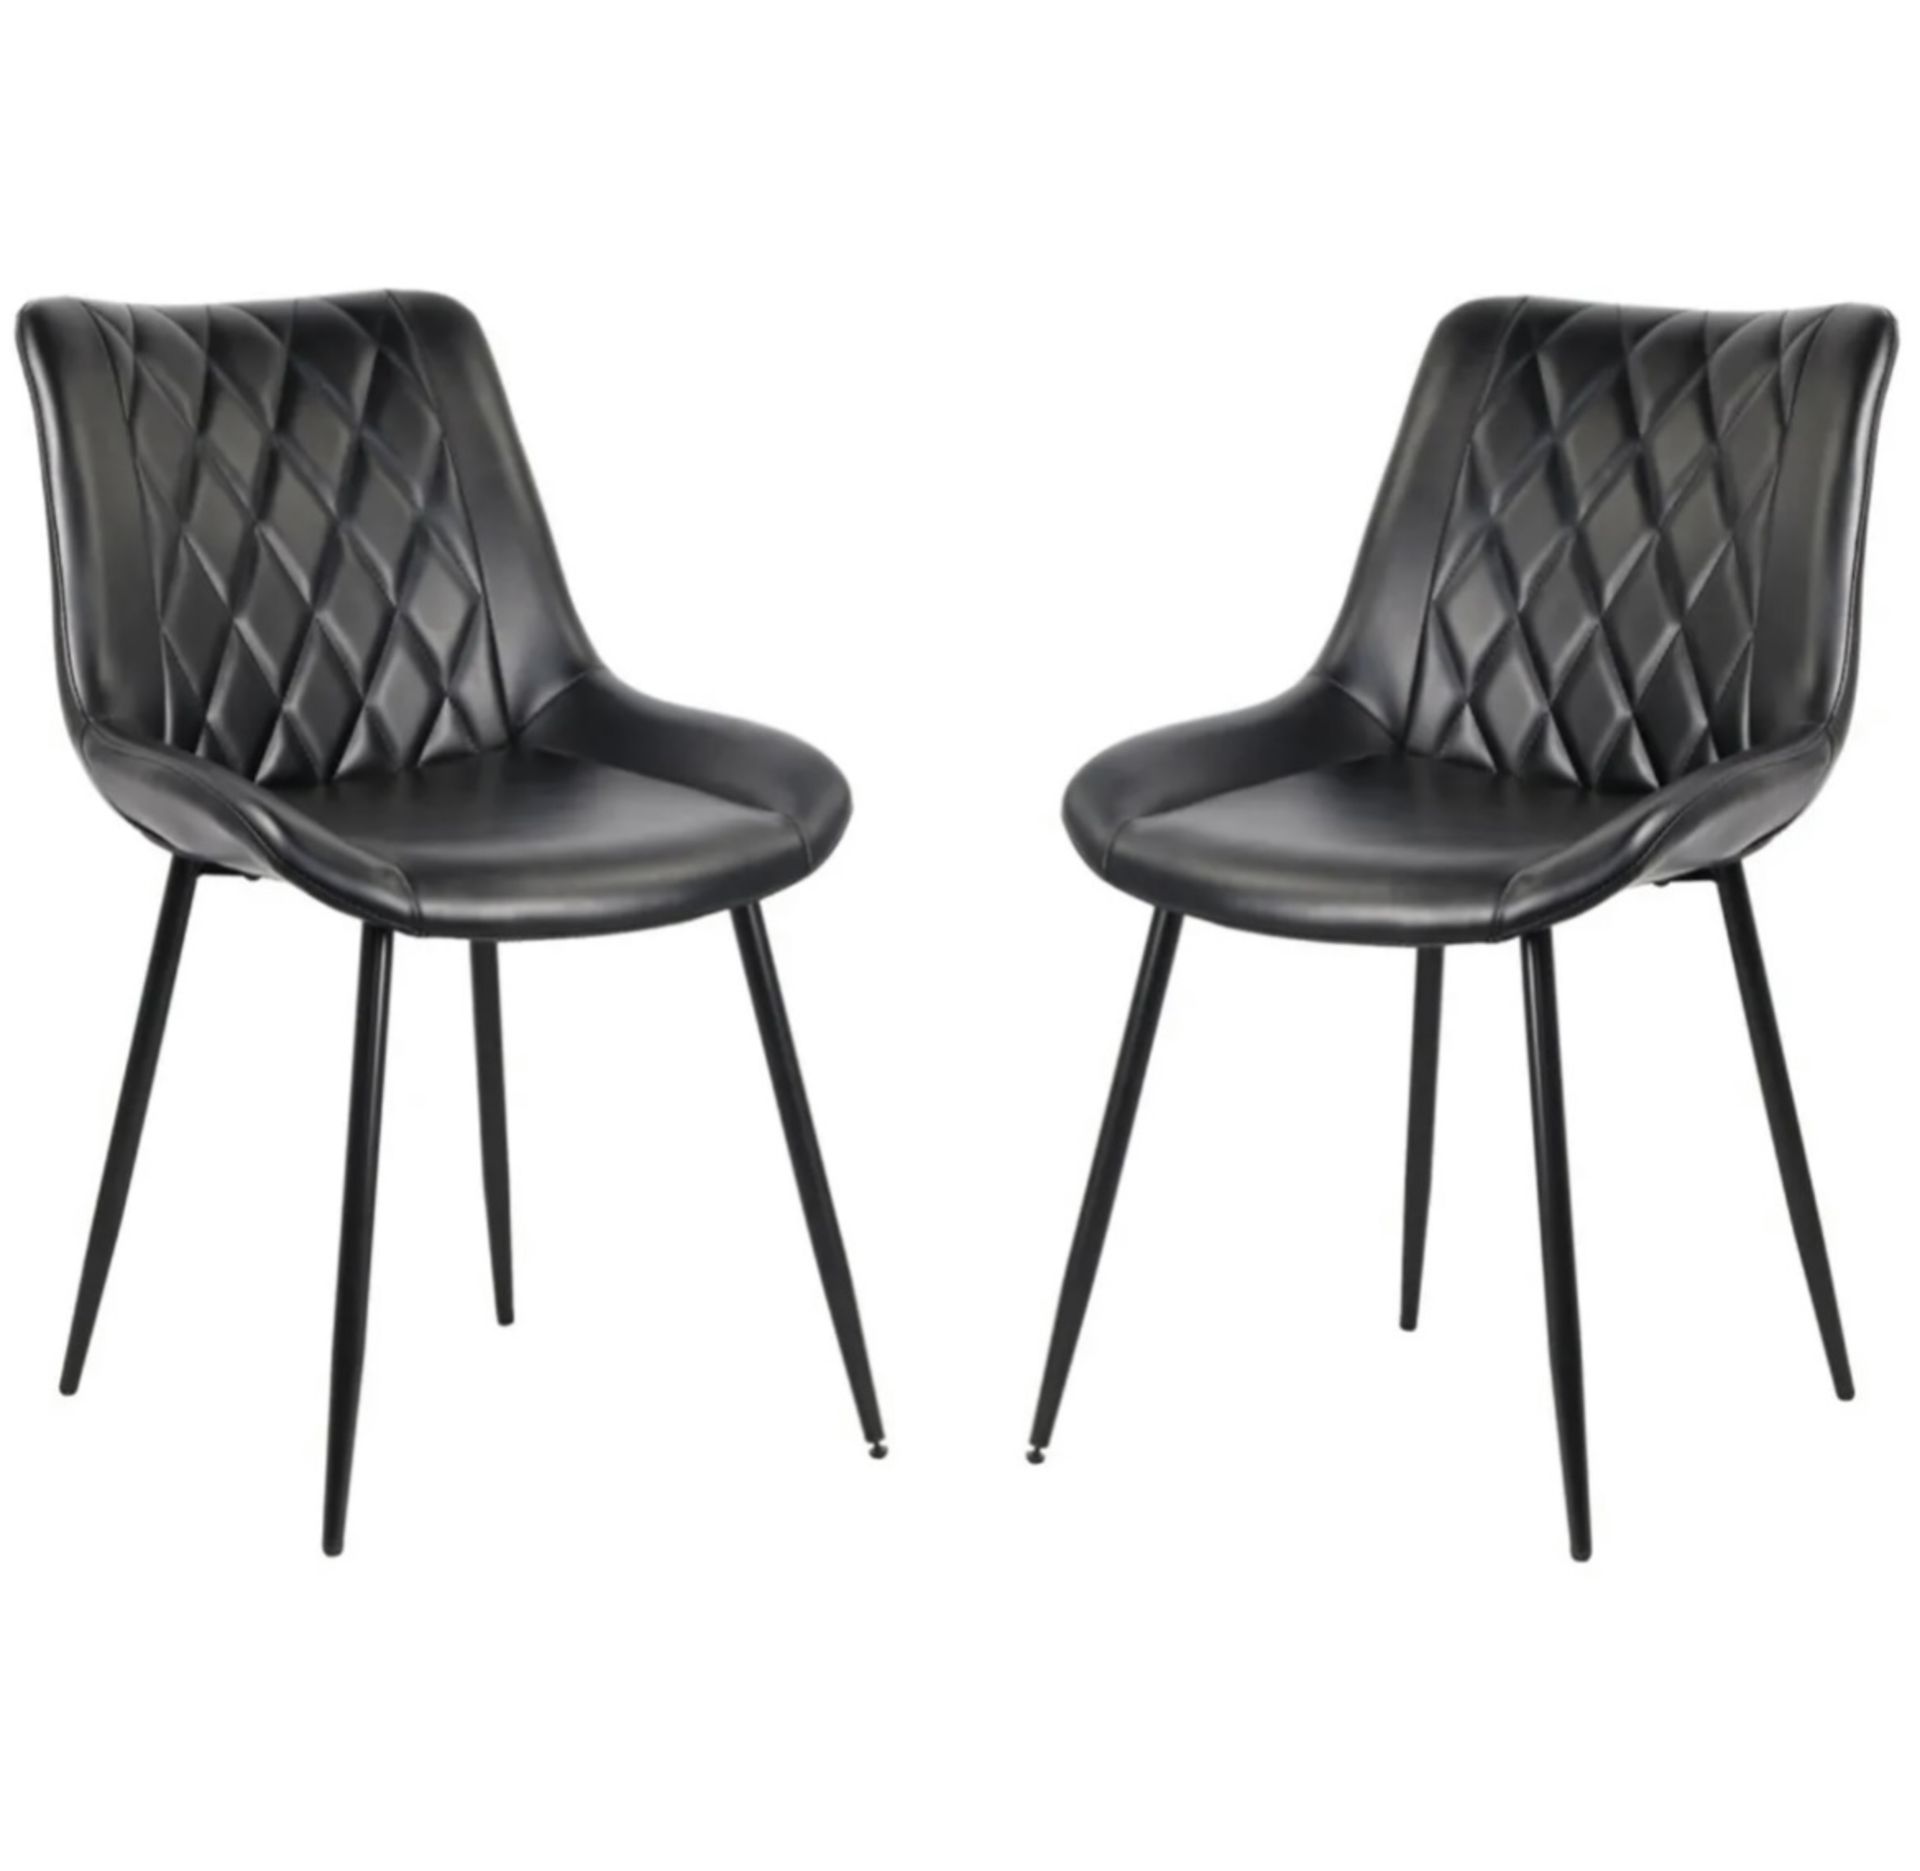 X4 BRAND NEW BLACK VINTAGE FAUX LEATHER RESTAURANT/DINING CHAIRS